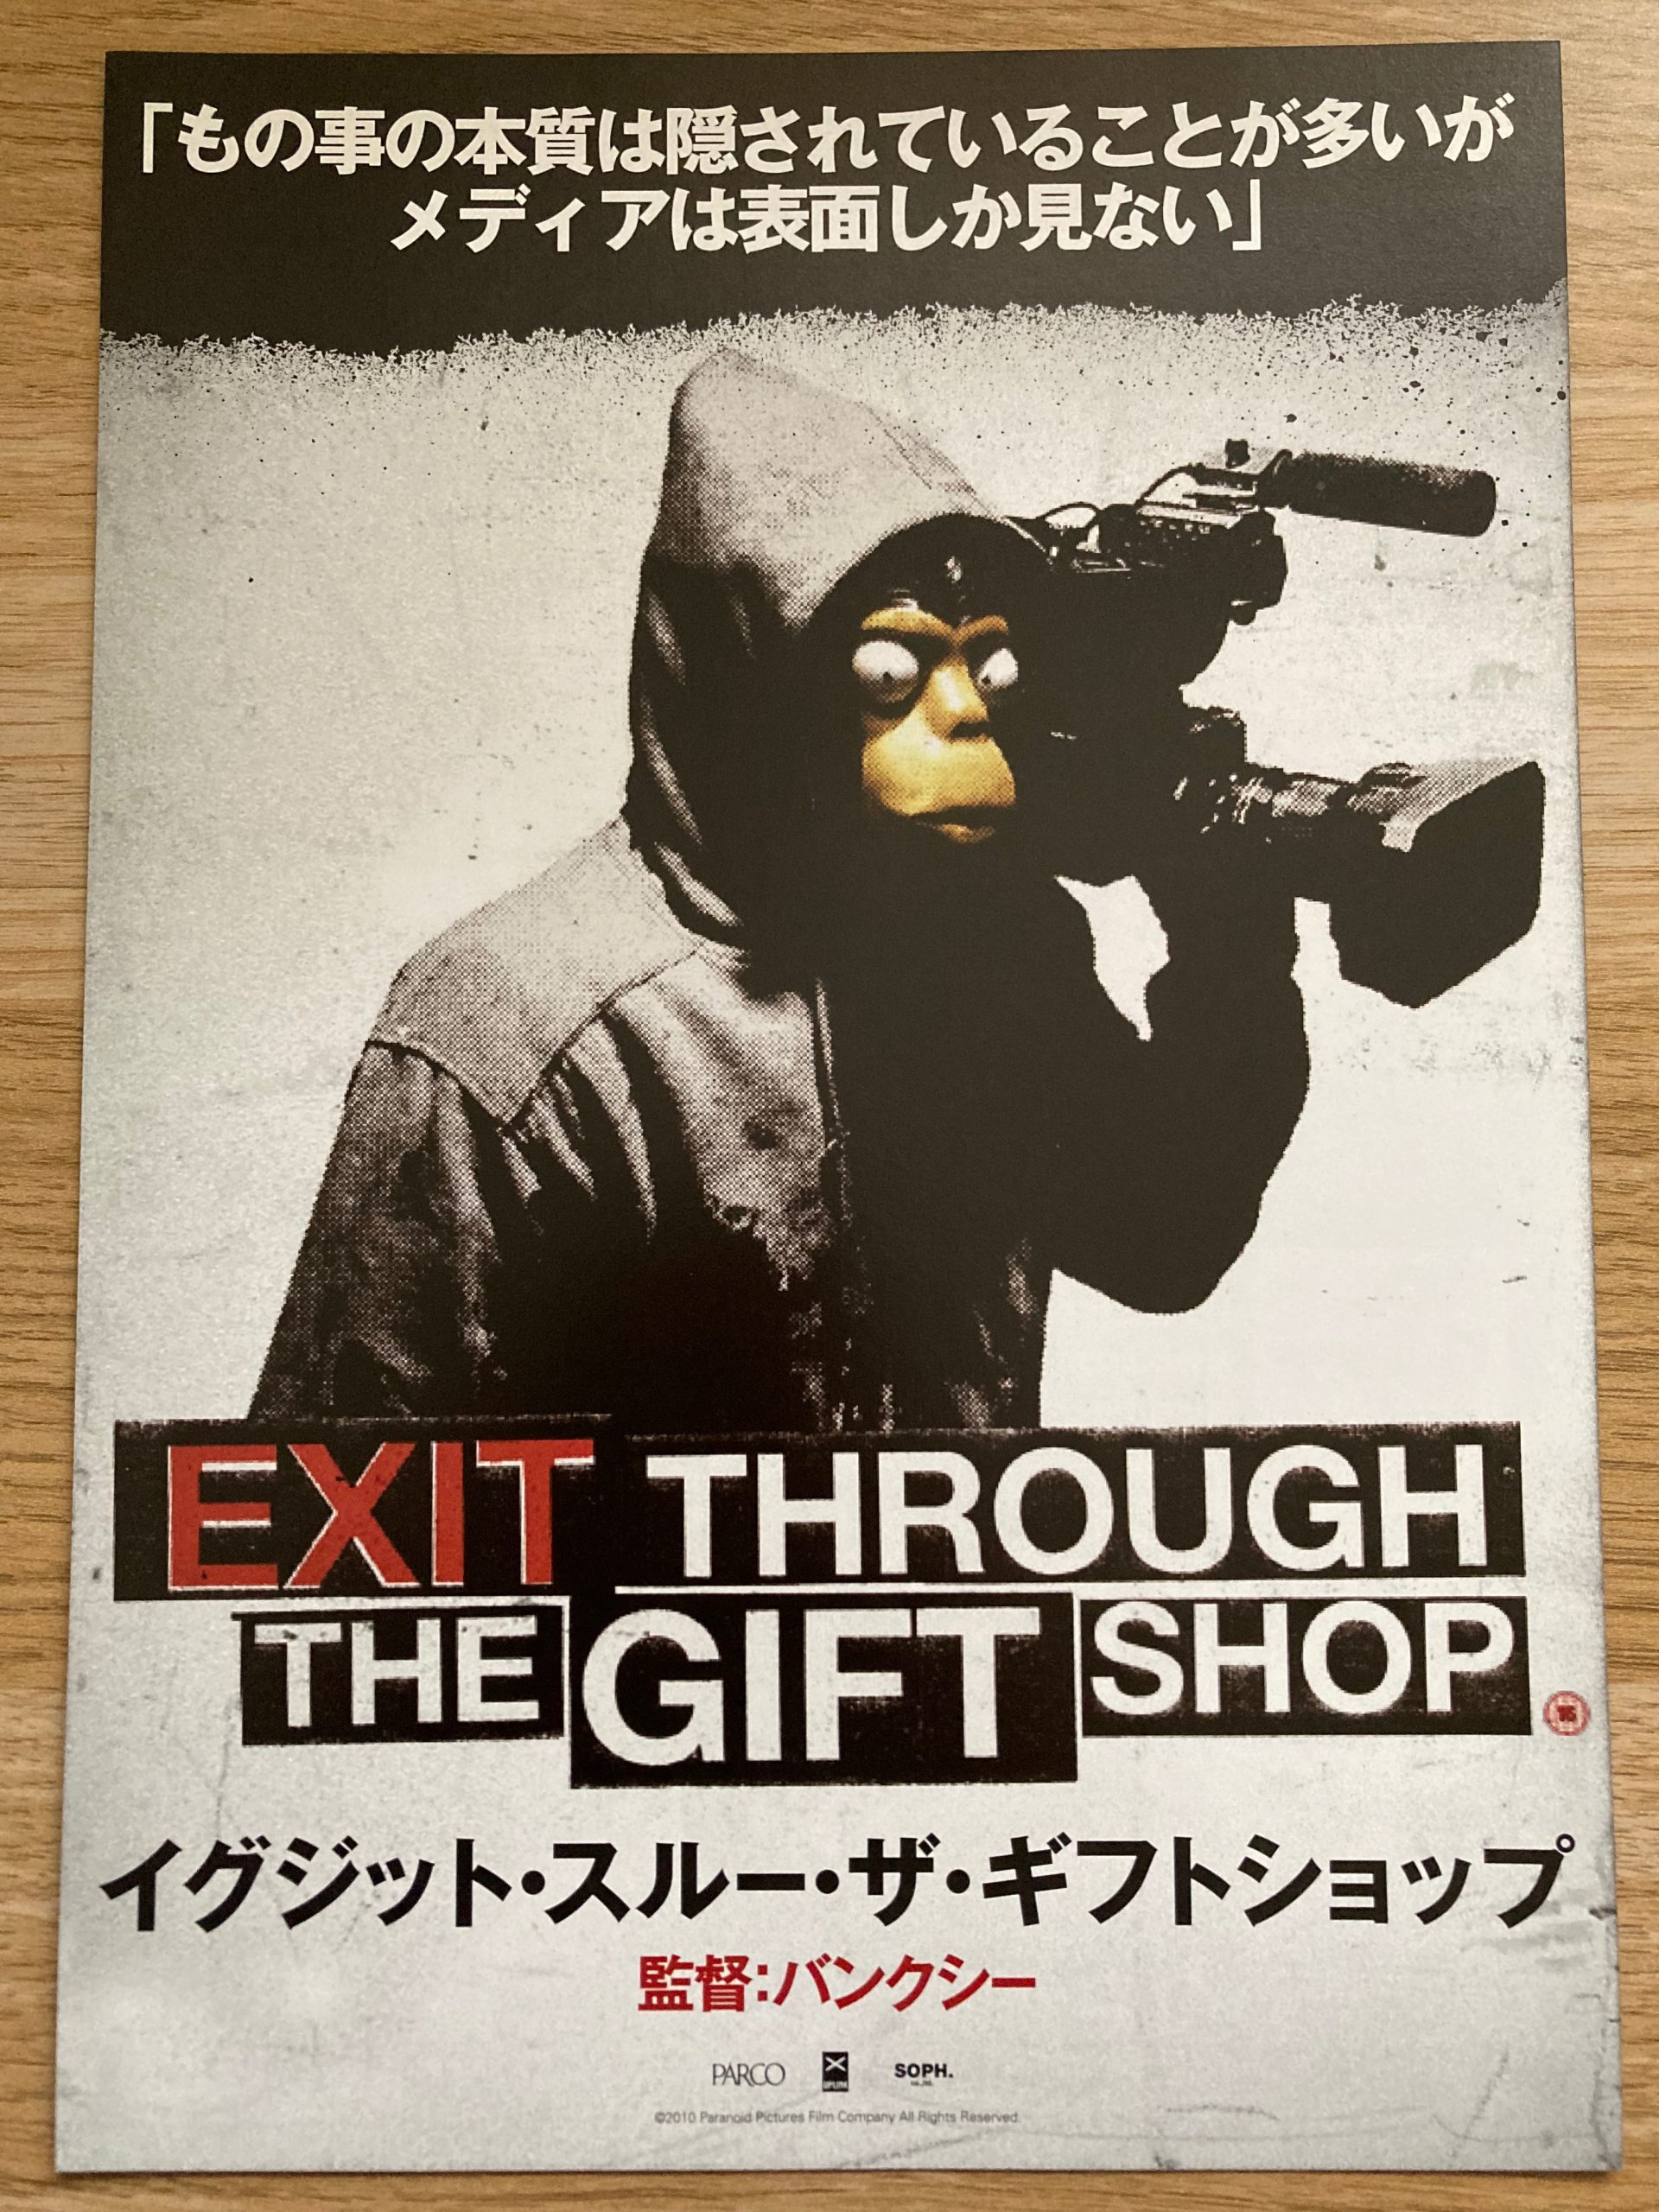 Exit Through the gift shop japanese poster banksy